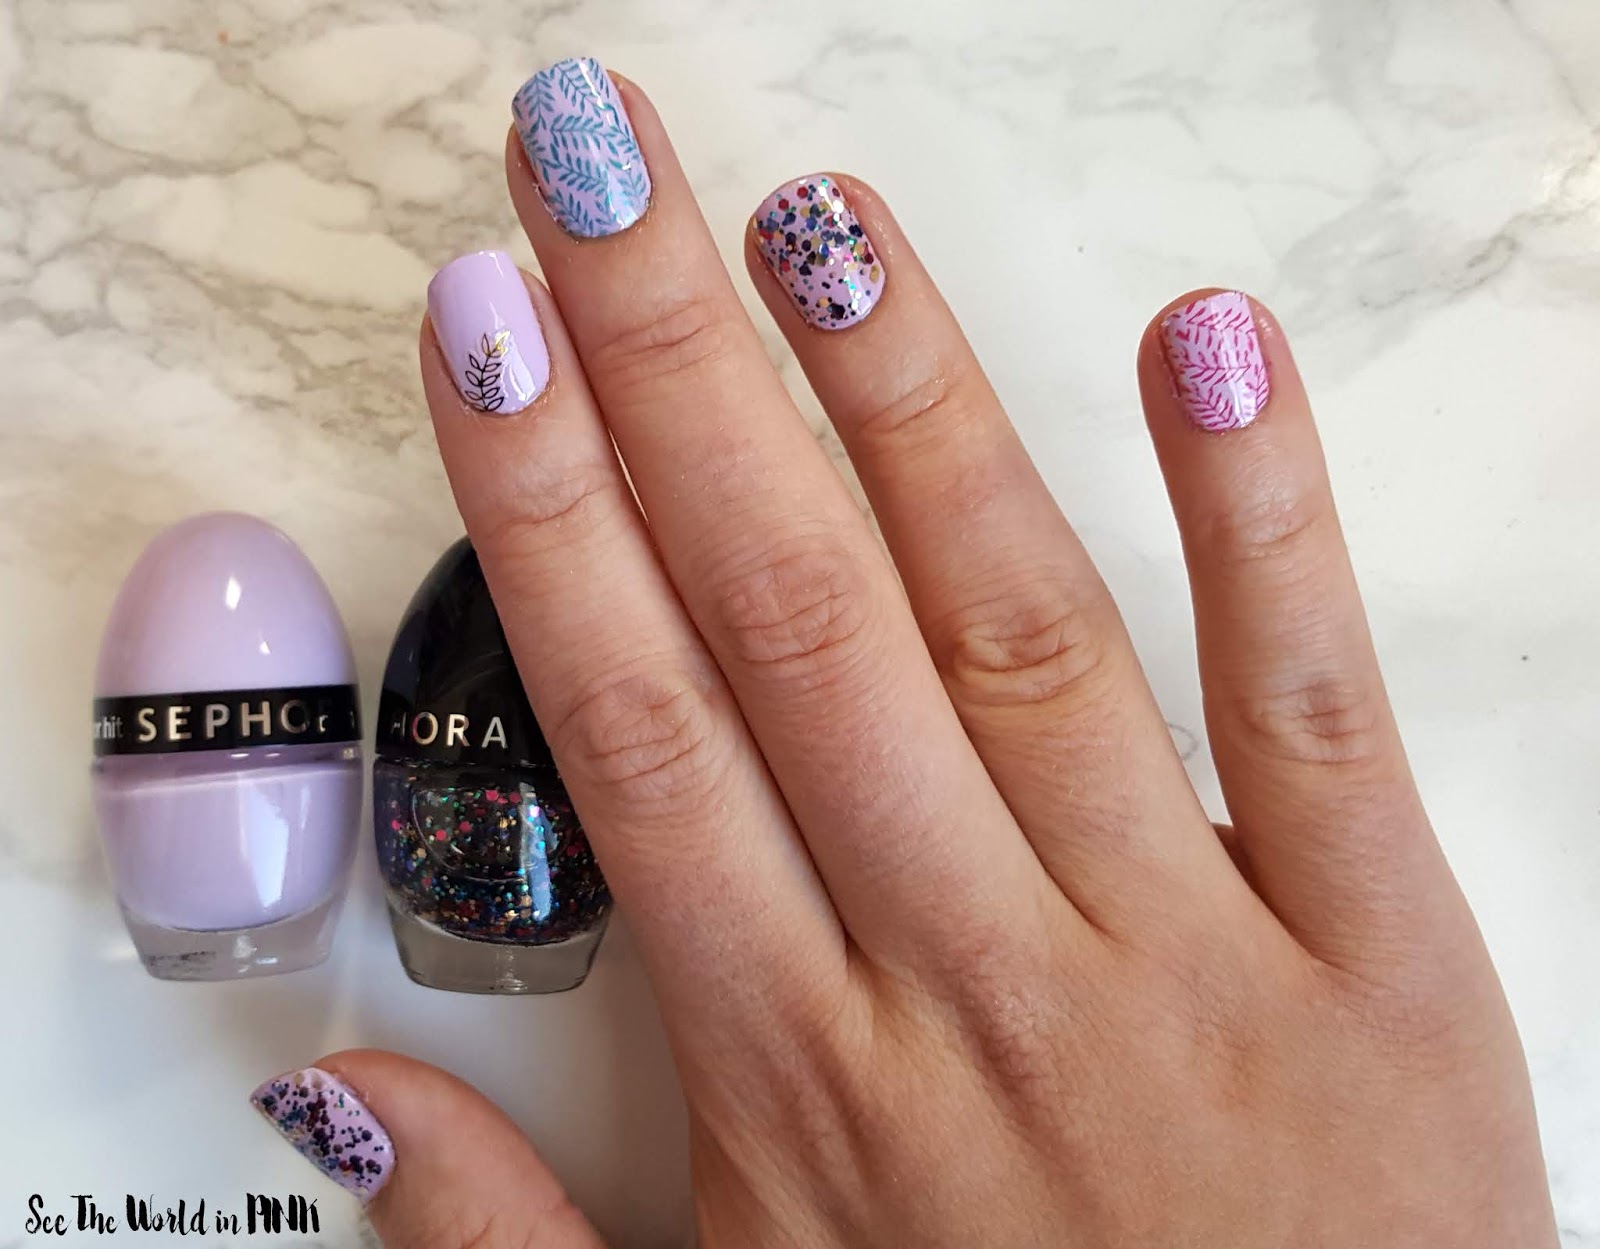 Manicure Monday - New Sephora Collection Color Hit Mini Nail Polishes + Leaves Nail Art 